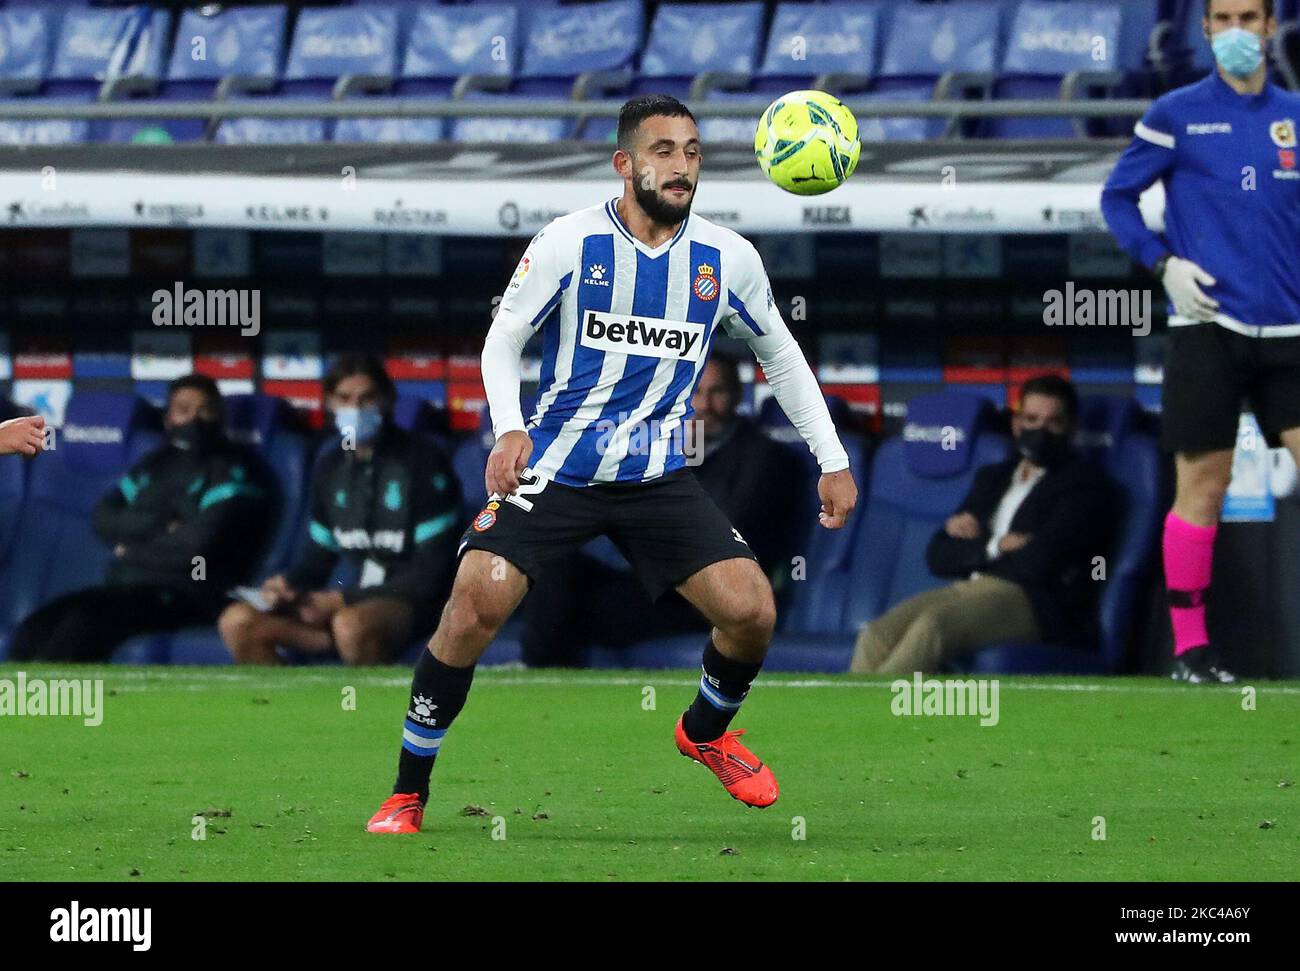 Matias Vargas during the match between RCD Espanyol and Girona FC, corresponding to the week 13 of the Liga Smartbank, played at the RCDE Stadium on 20th November 2020, in Barcelona, Spain. -- (Photo by Urbanandsport/NurPhoto) Stock Photo